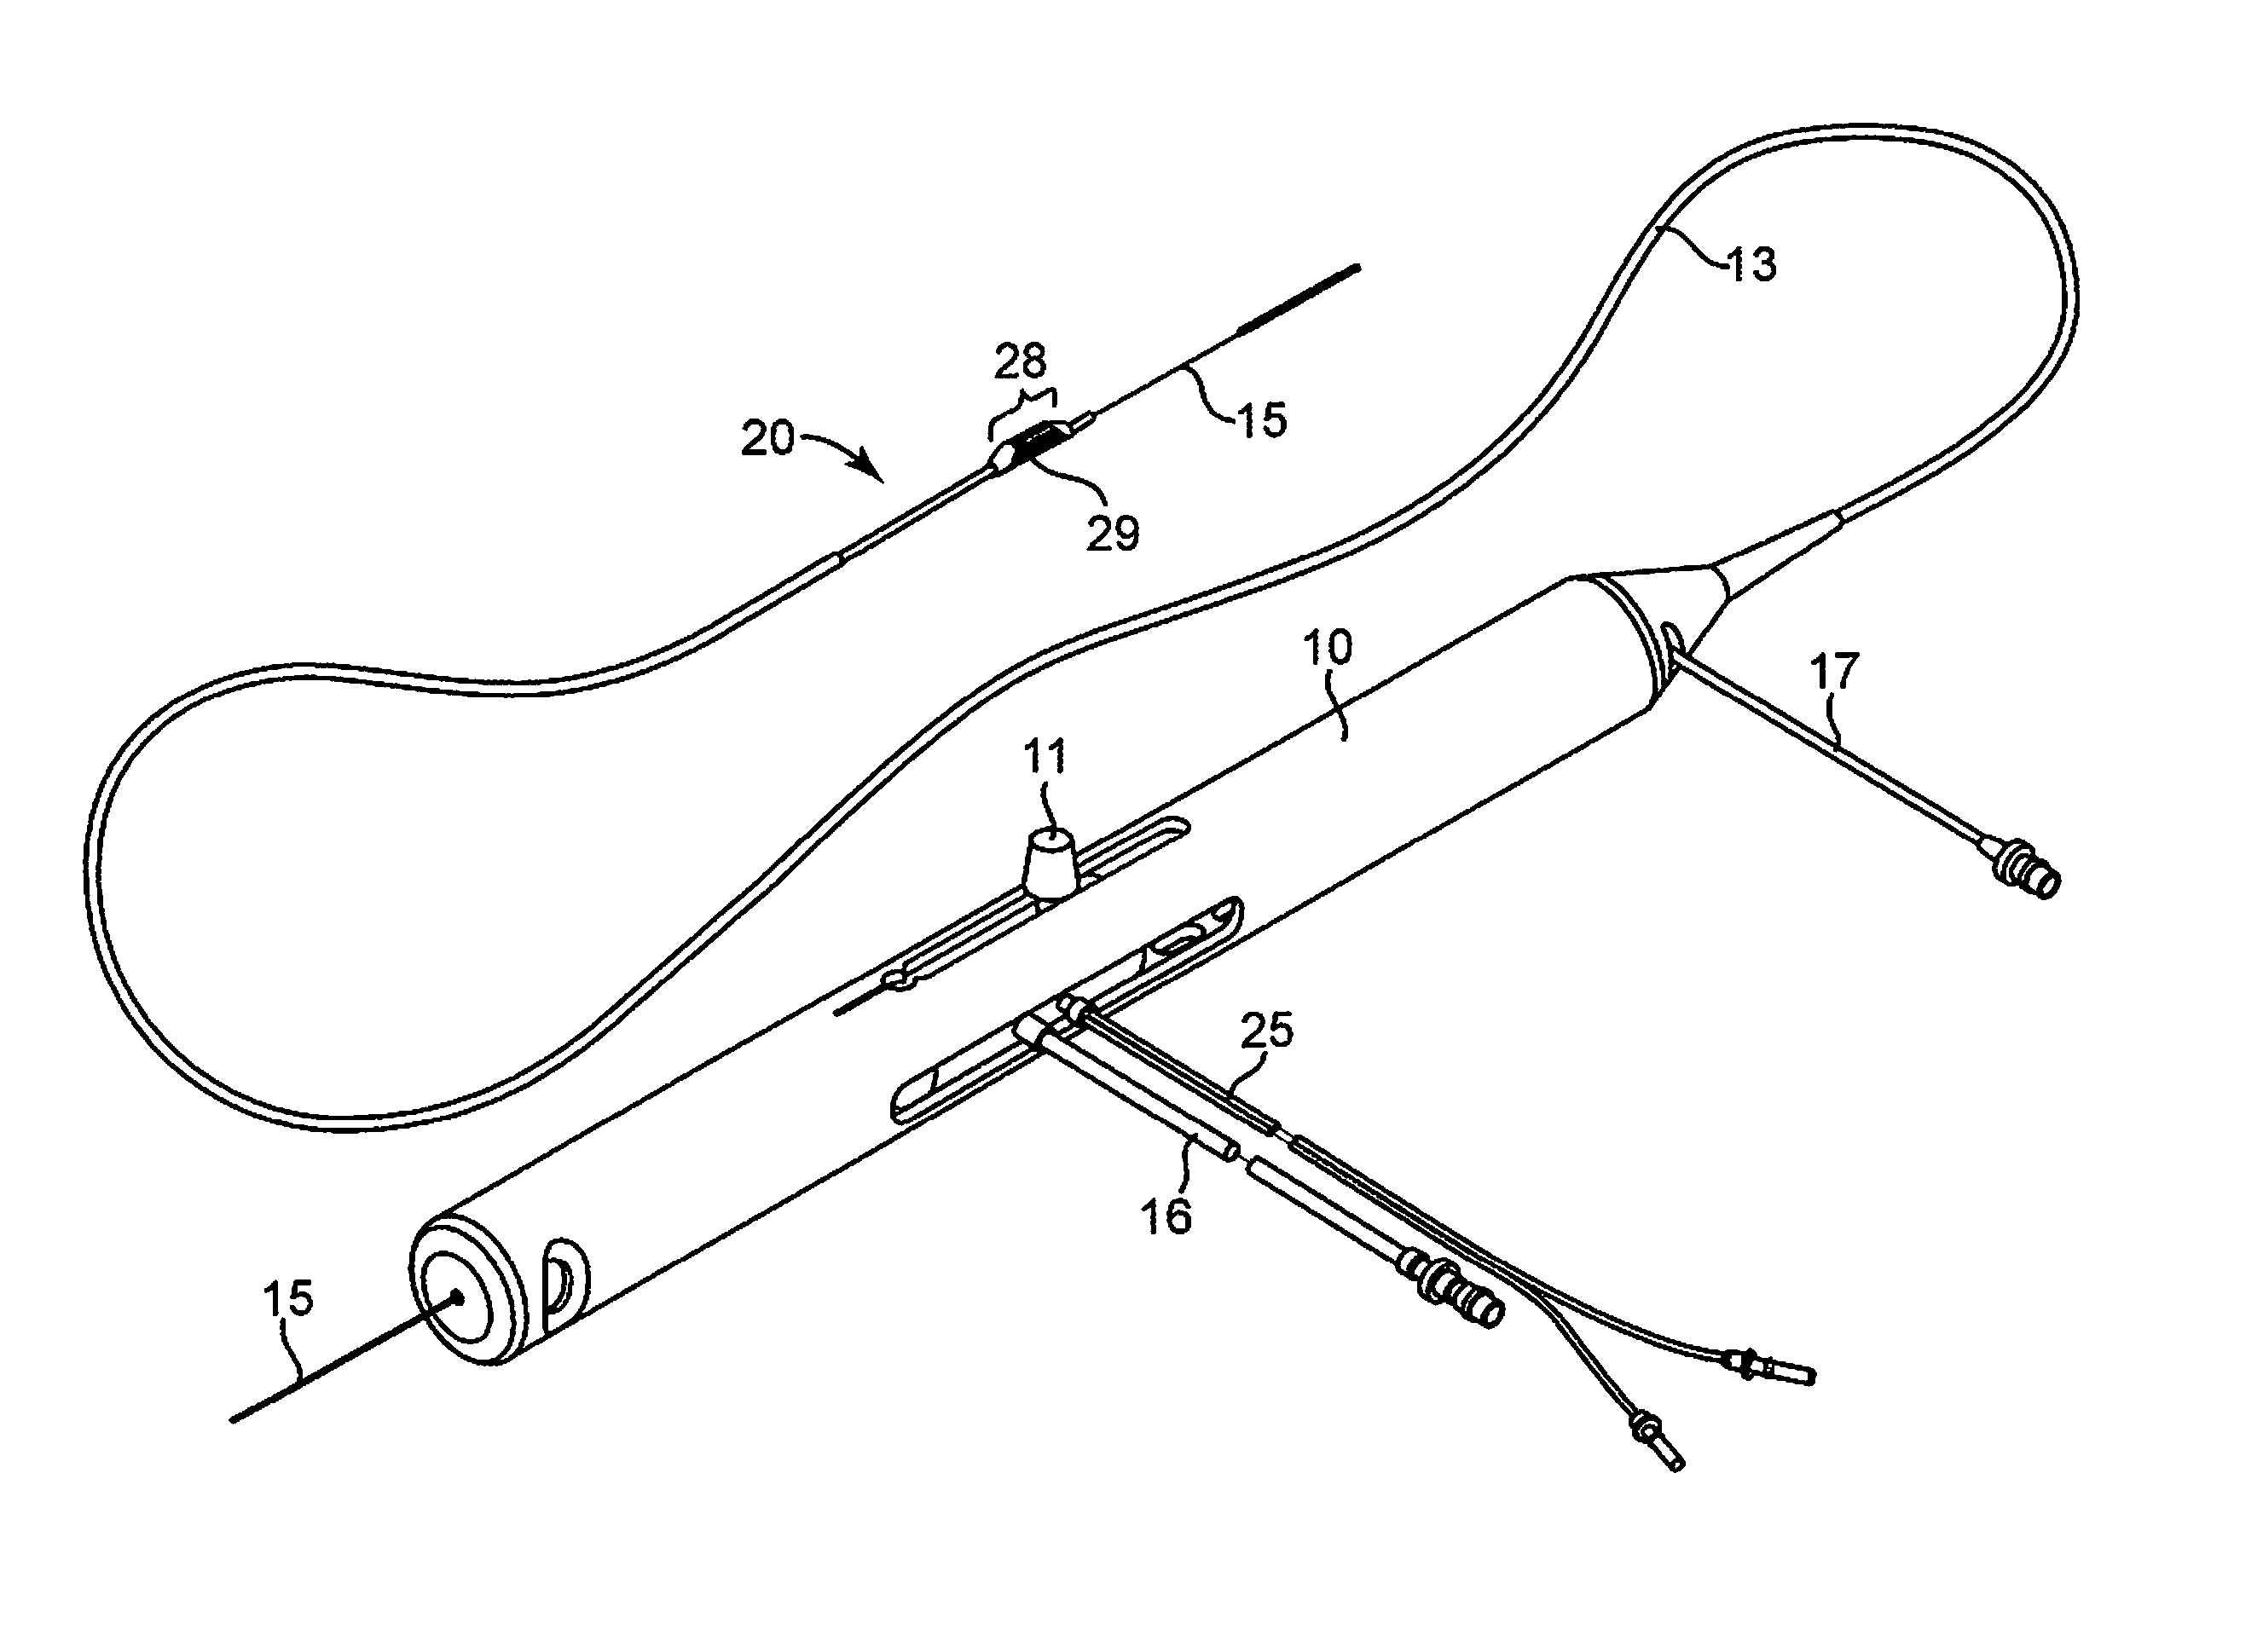 Rotational atherectomy device and method to improve abrading efficiency